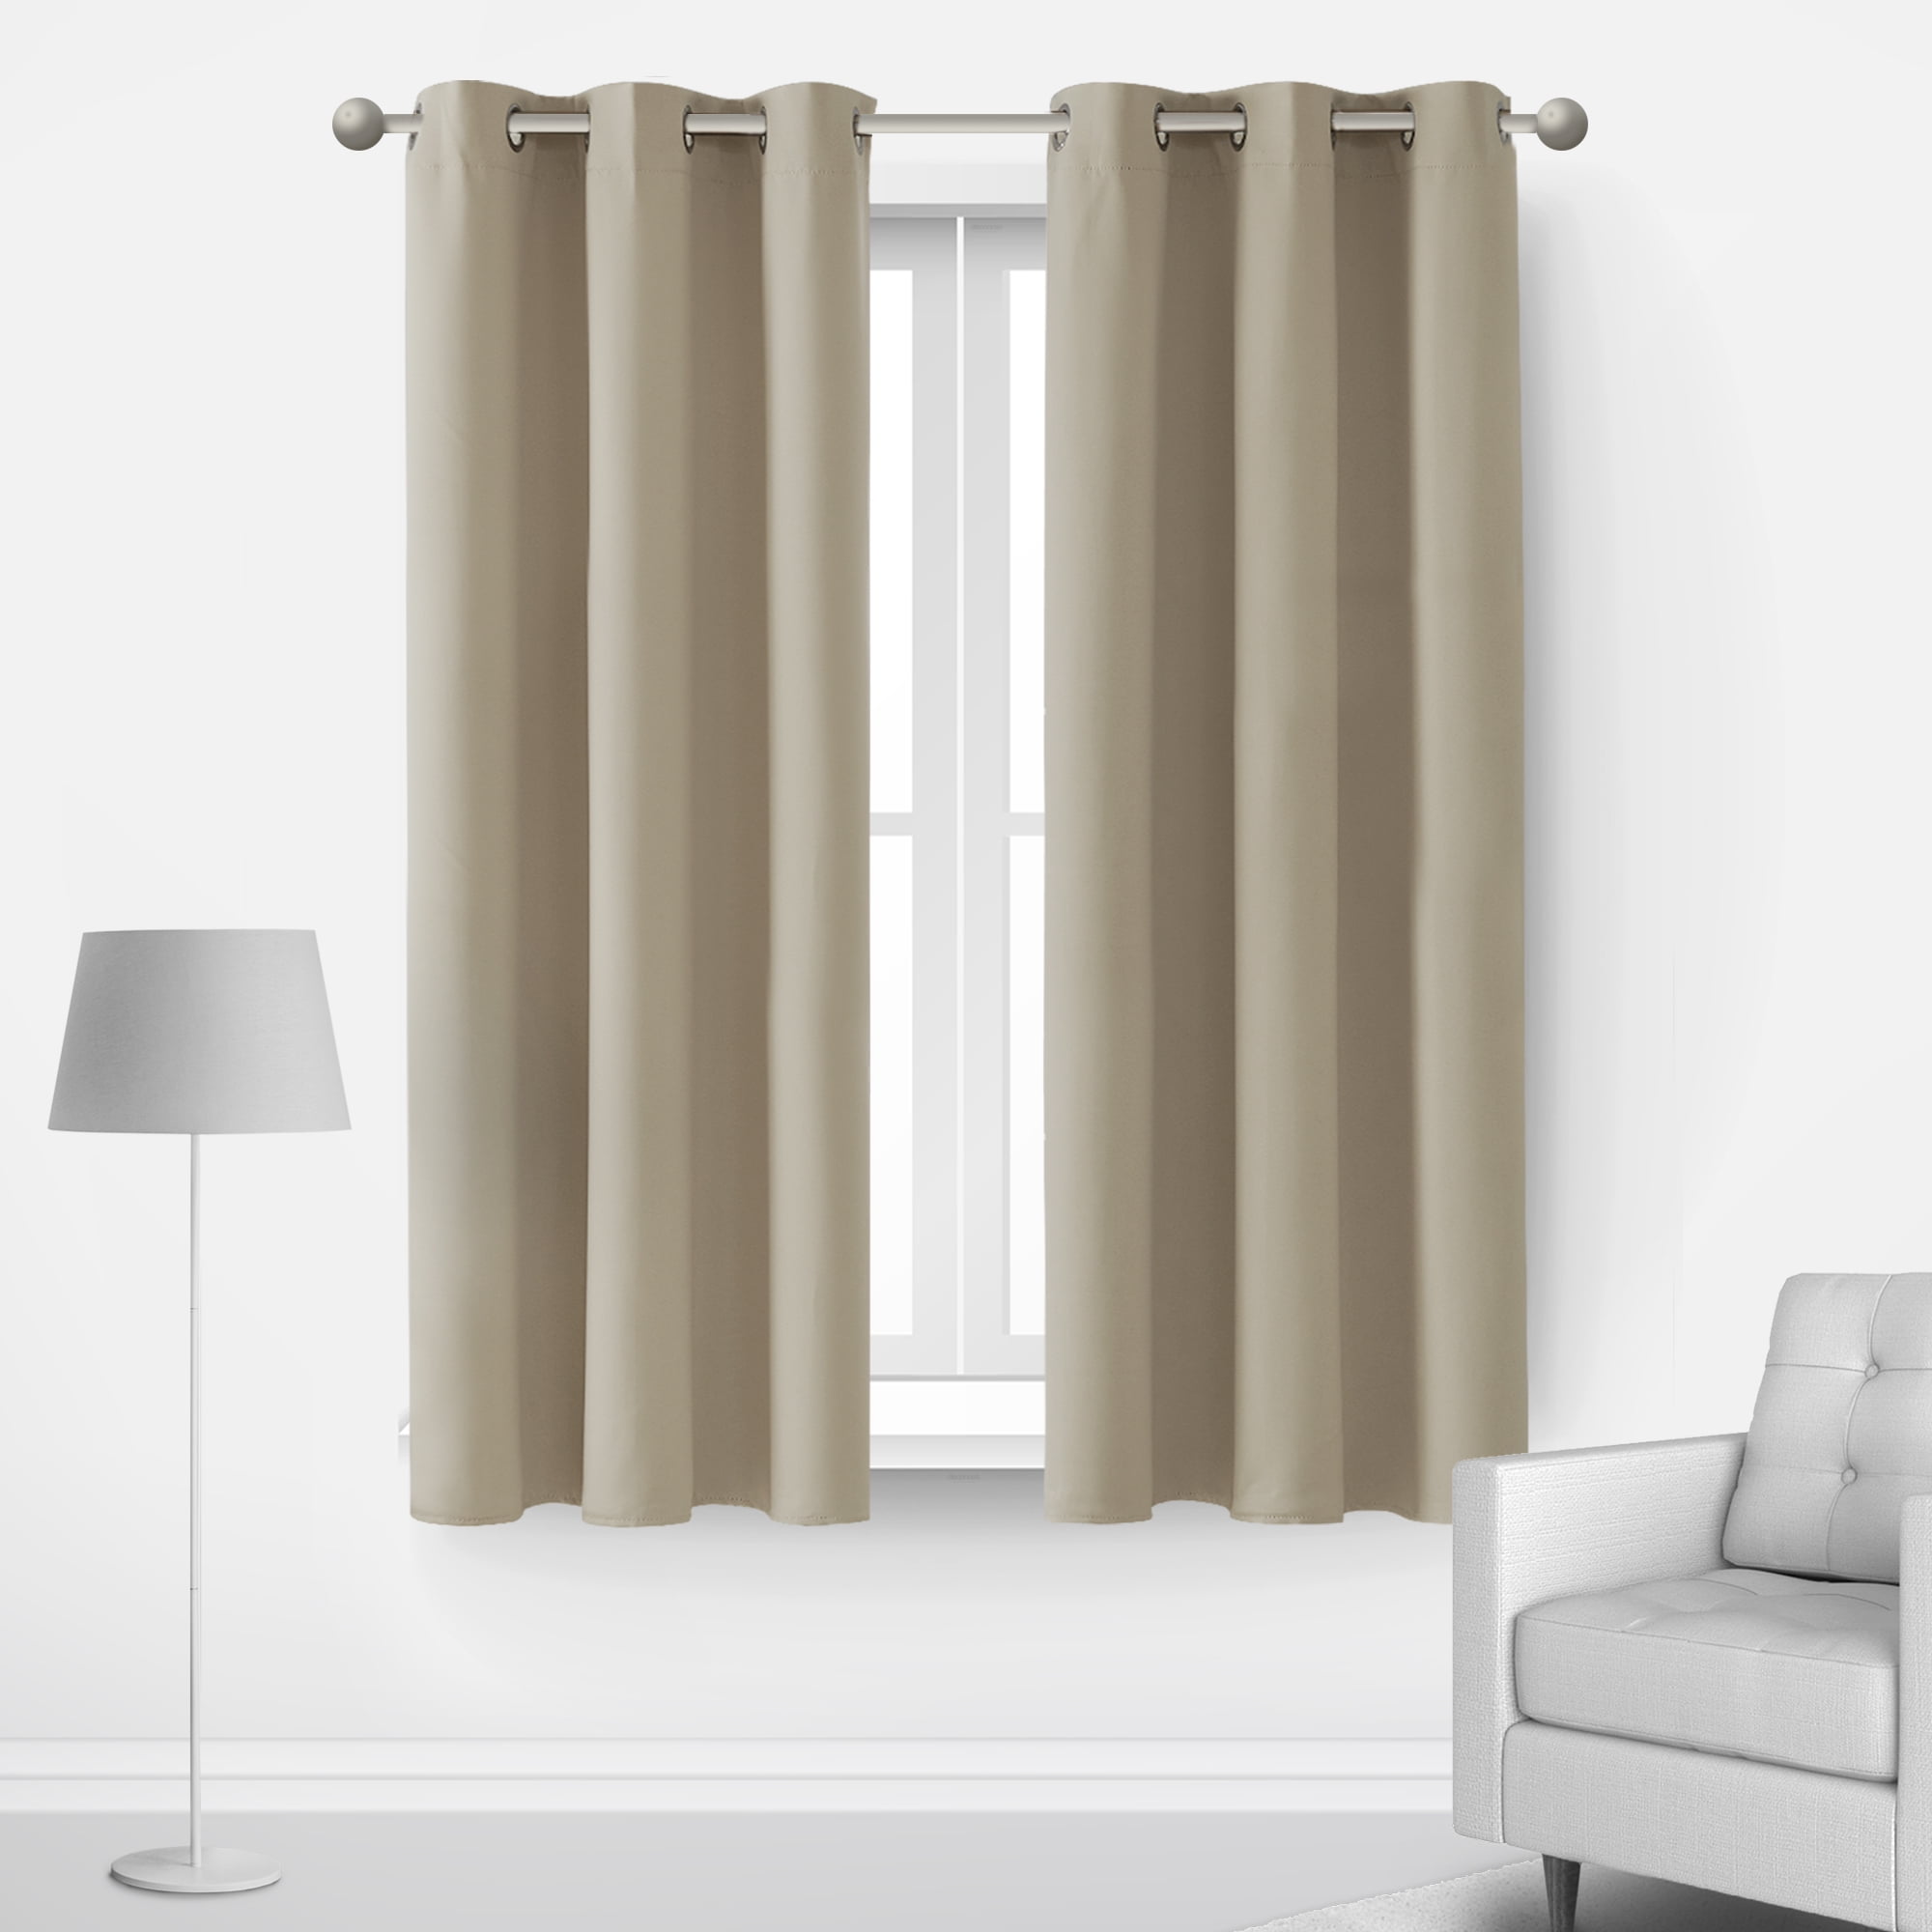 Thermal Insulated Curtains Rod Pocket Champagne and Greyish White 42x54,2panels 